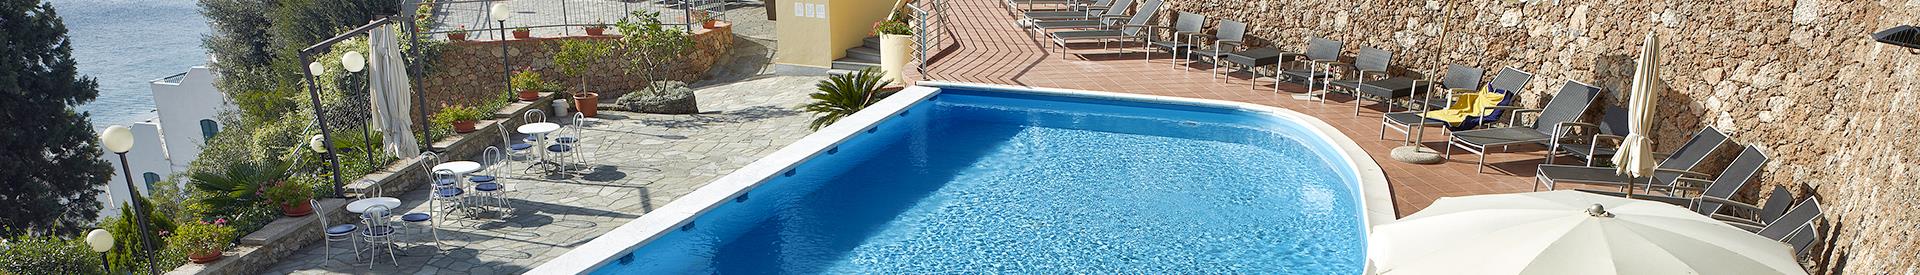  Looking for a hotel for your stay in Spotorno (SV)? Book/reserve at the Best Western Hotel Acqua Novella